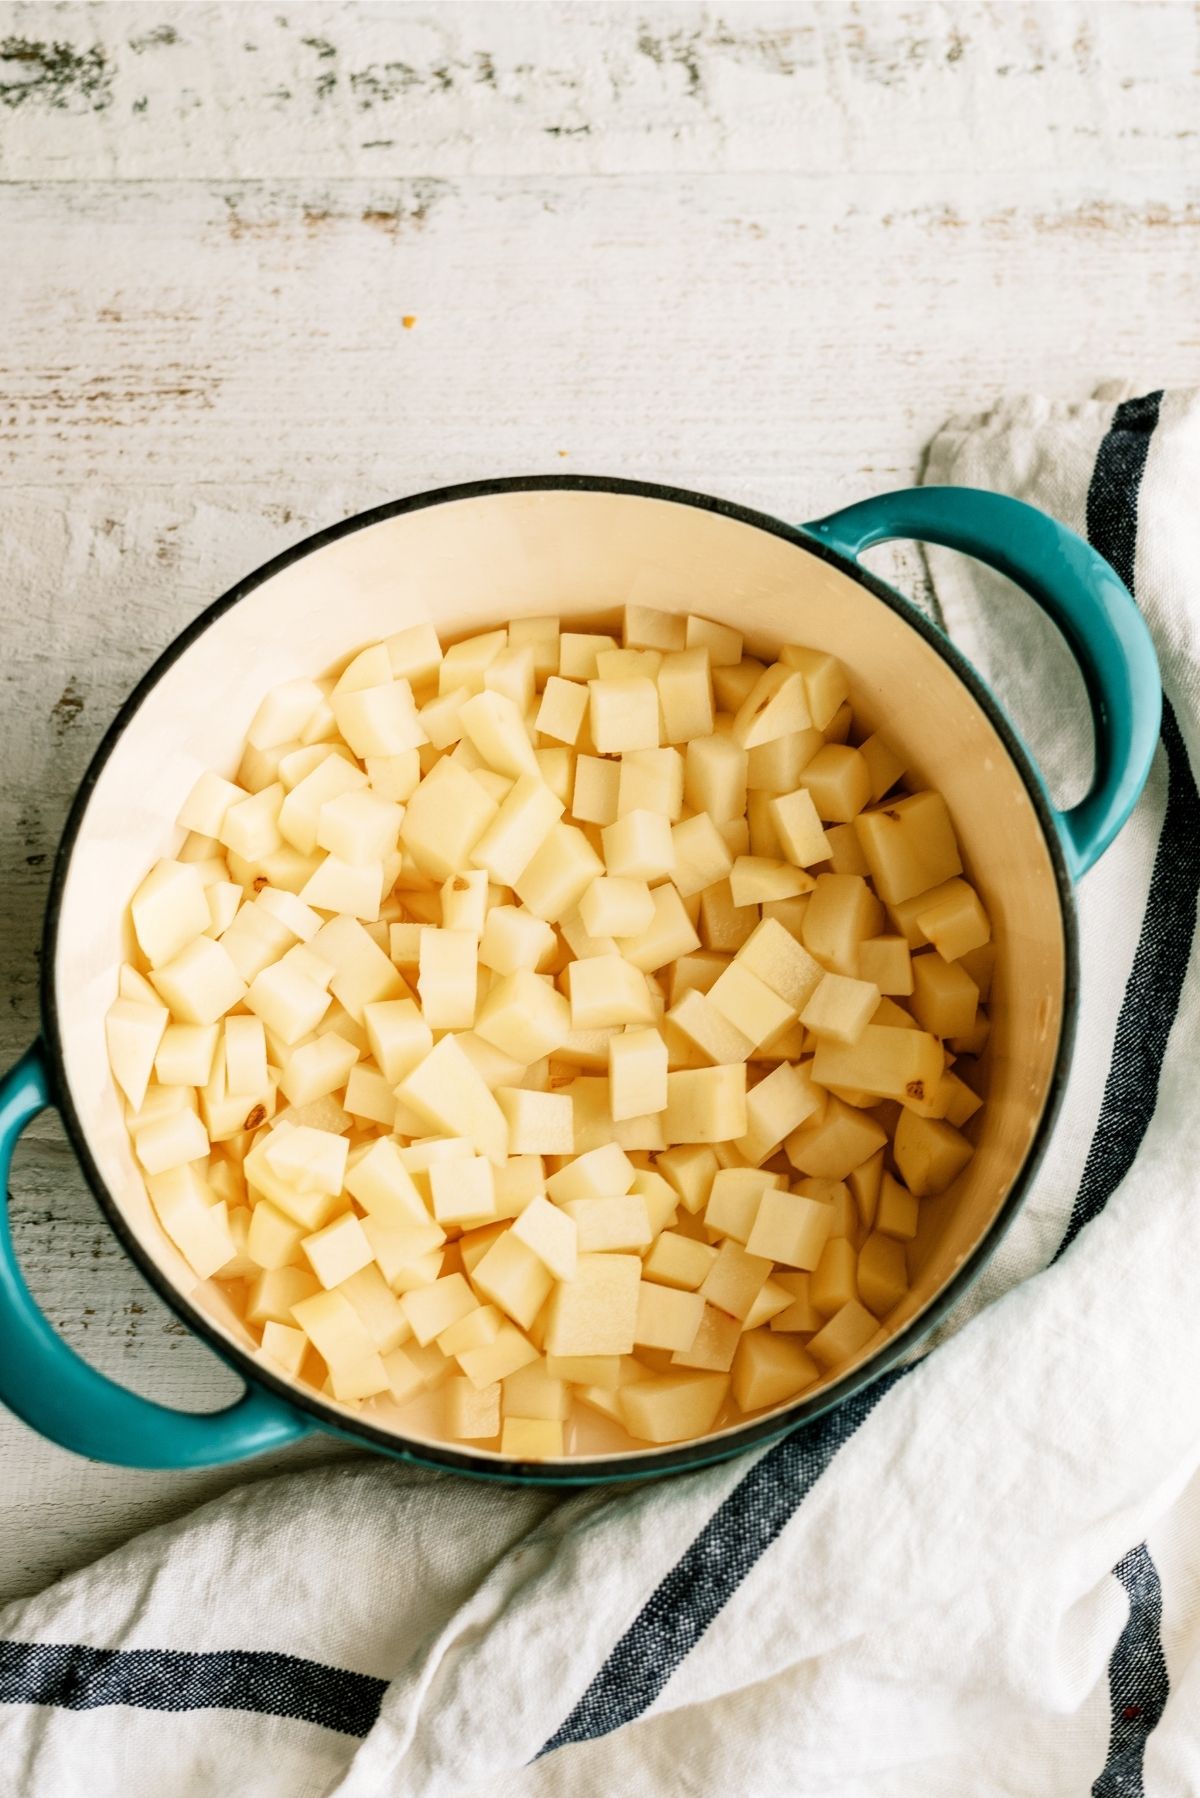 Cubed potatoes in a stock pot